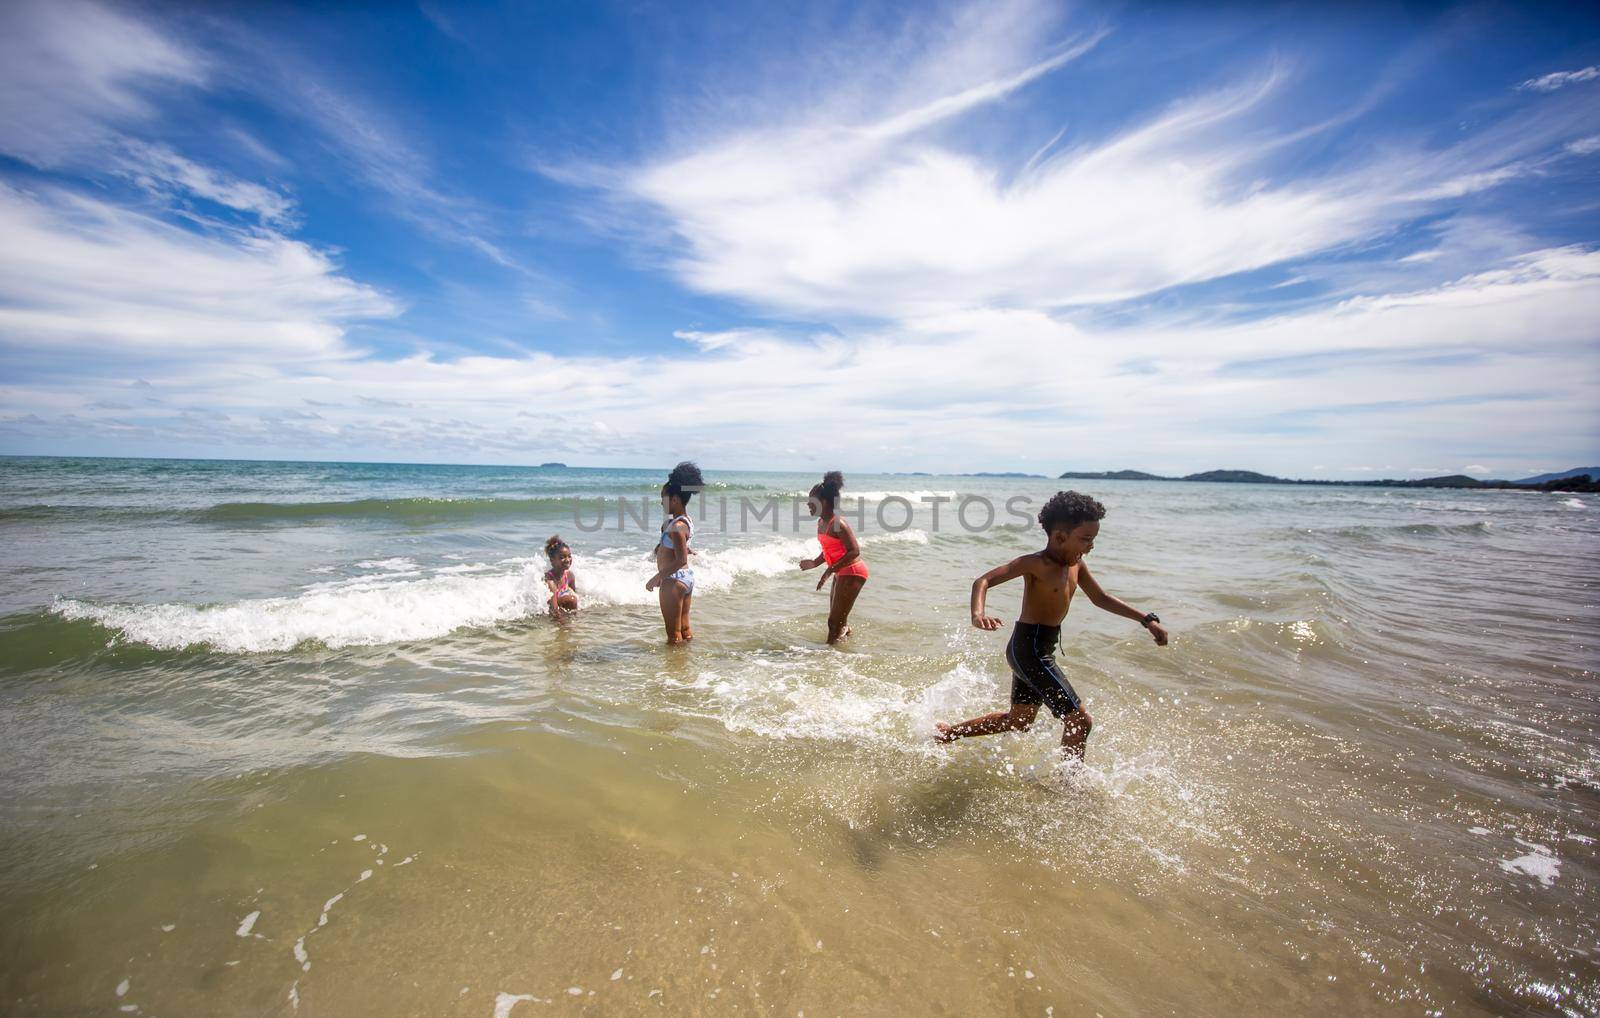 Kids playing running on sand at the beach, A group of children holding hands in a row on the beach in summer, rear view against sea and blue sky